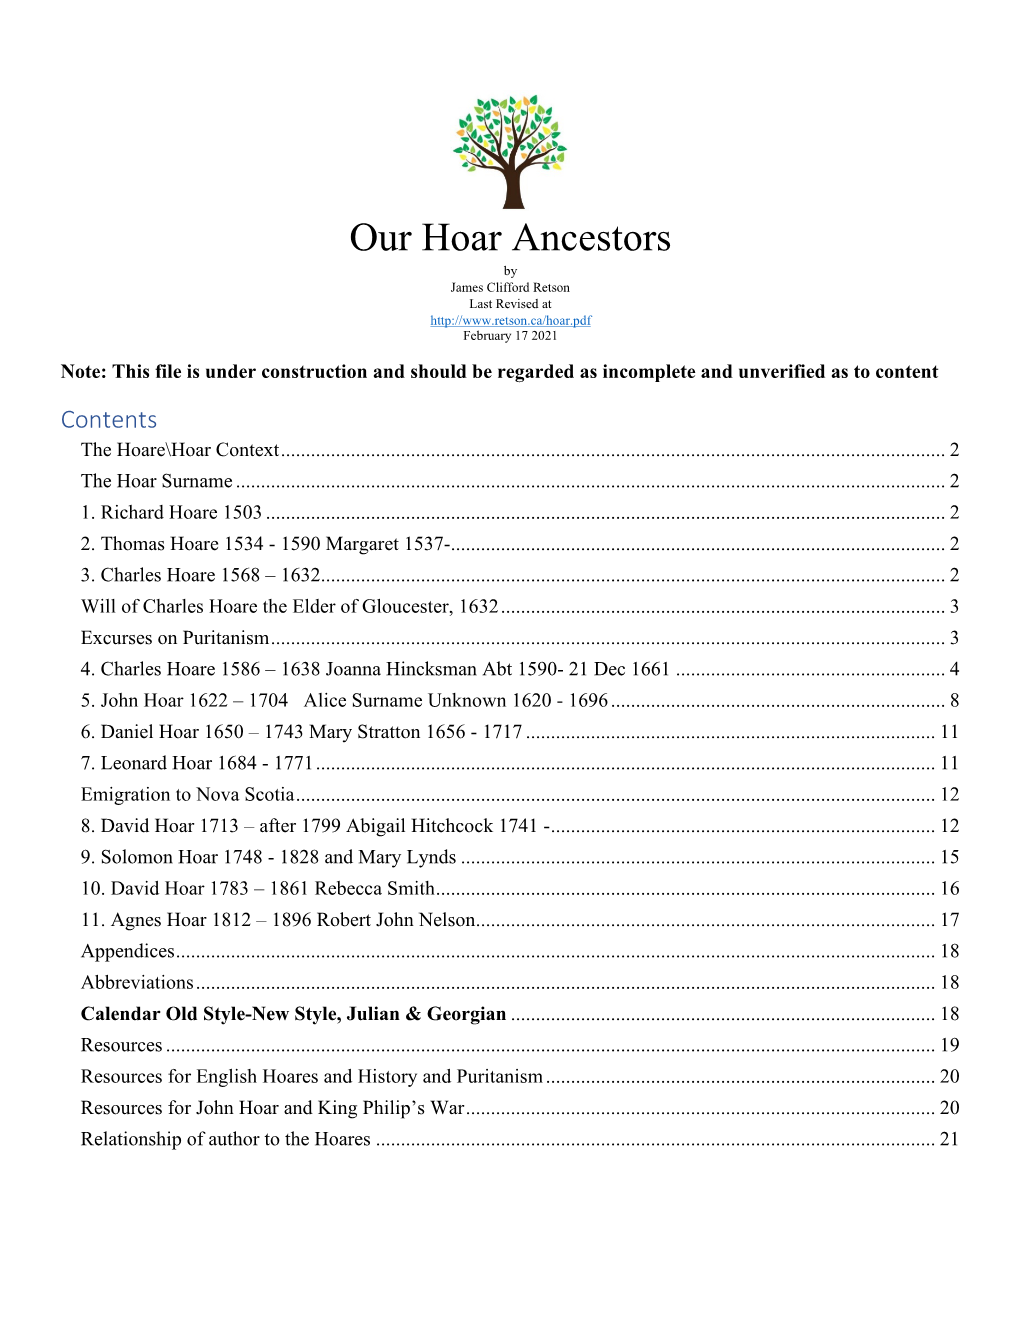 Our Hoar Ancestors by James Clifford Retson Last Revised at February 17 2021